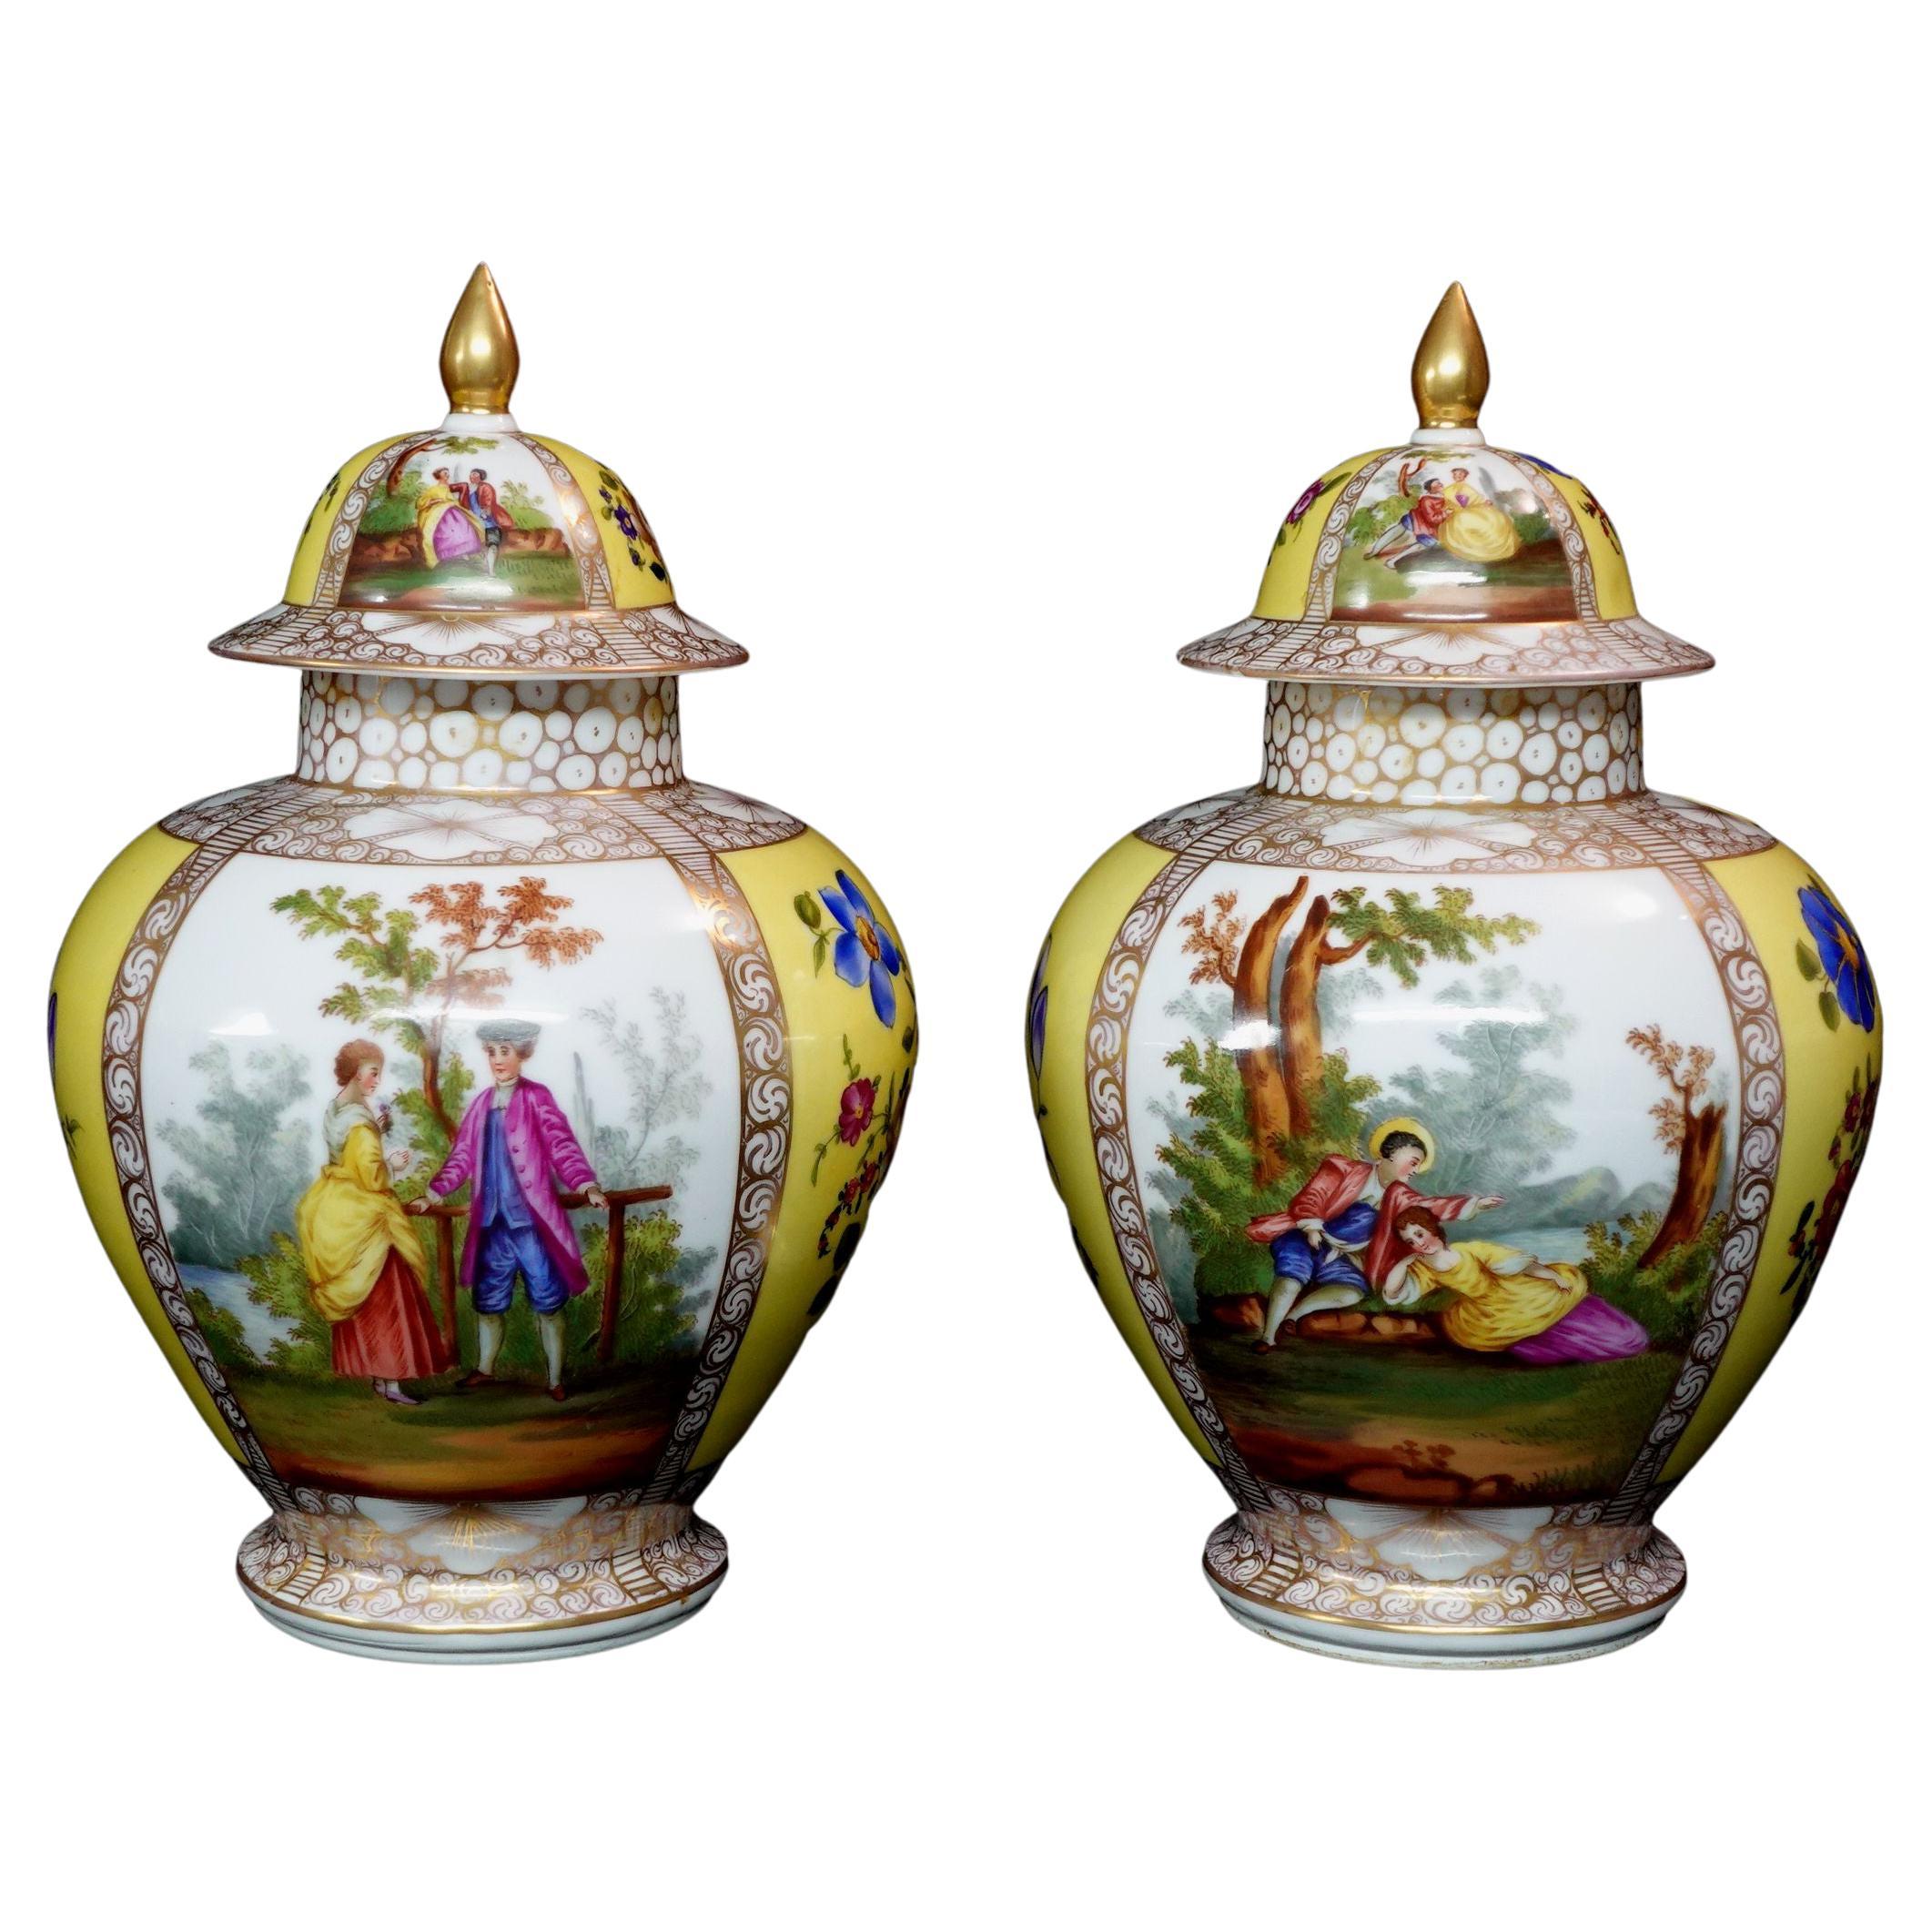 Pair of German Helena Wolfsohn Style Porcelain Covered Urns 19th Century